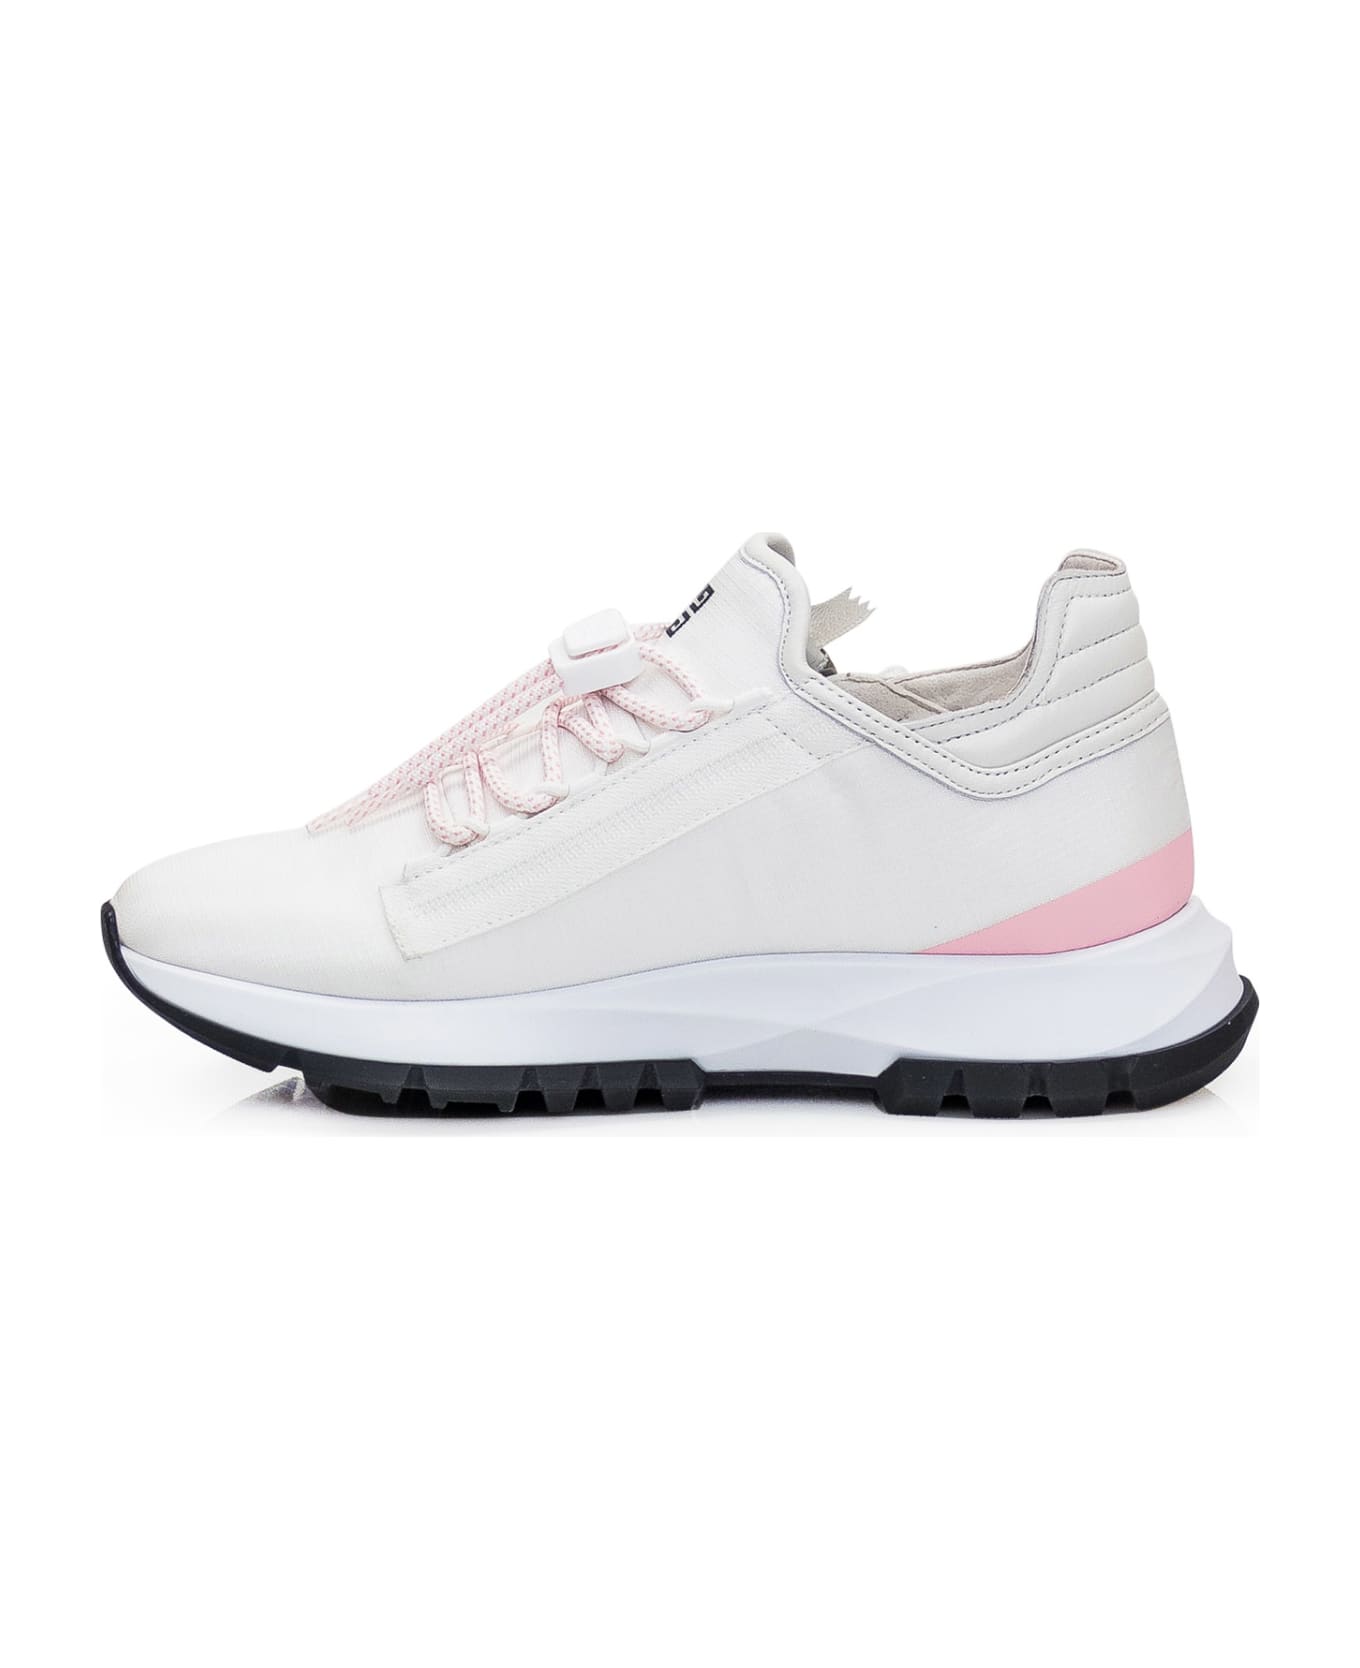 Givenchy 'spectre' Sneakers - WHITE PINK